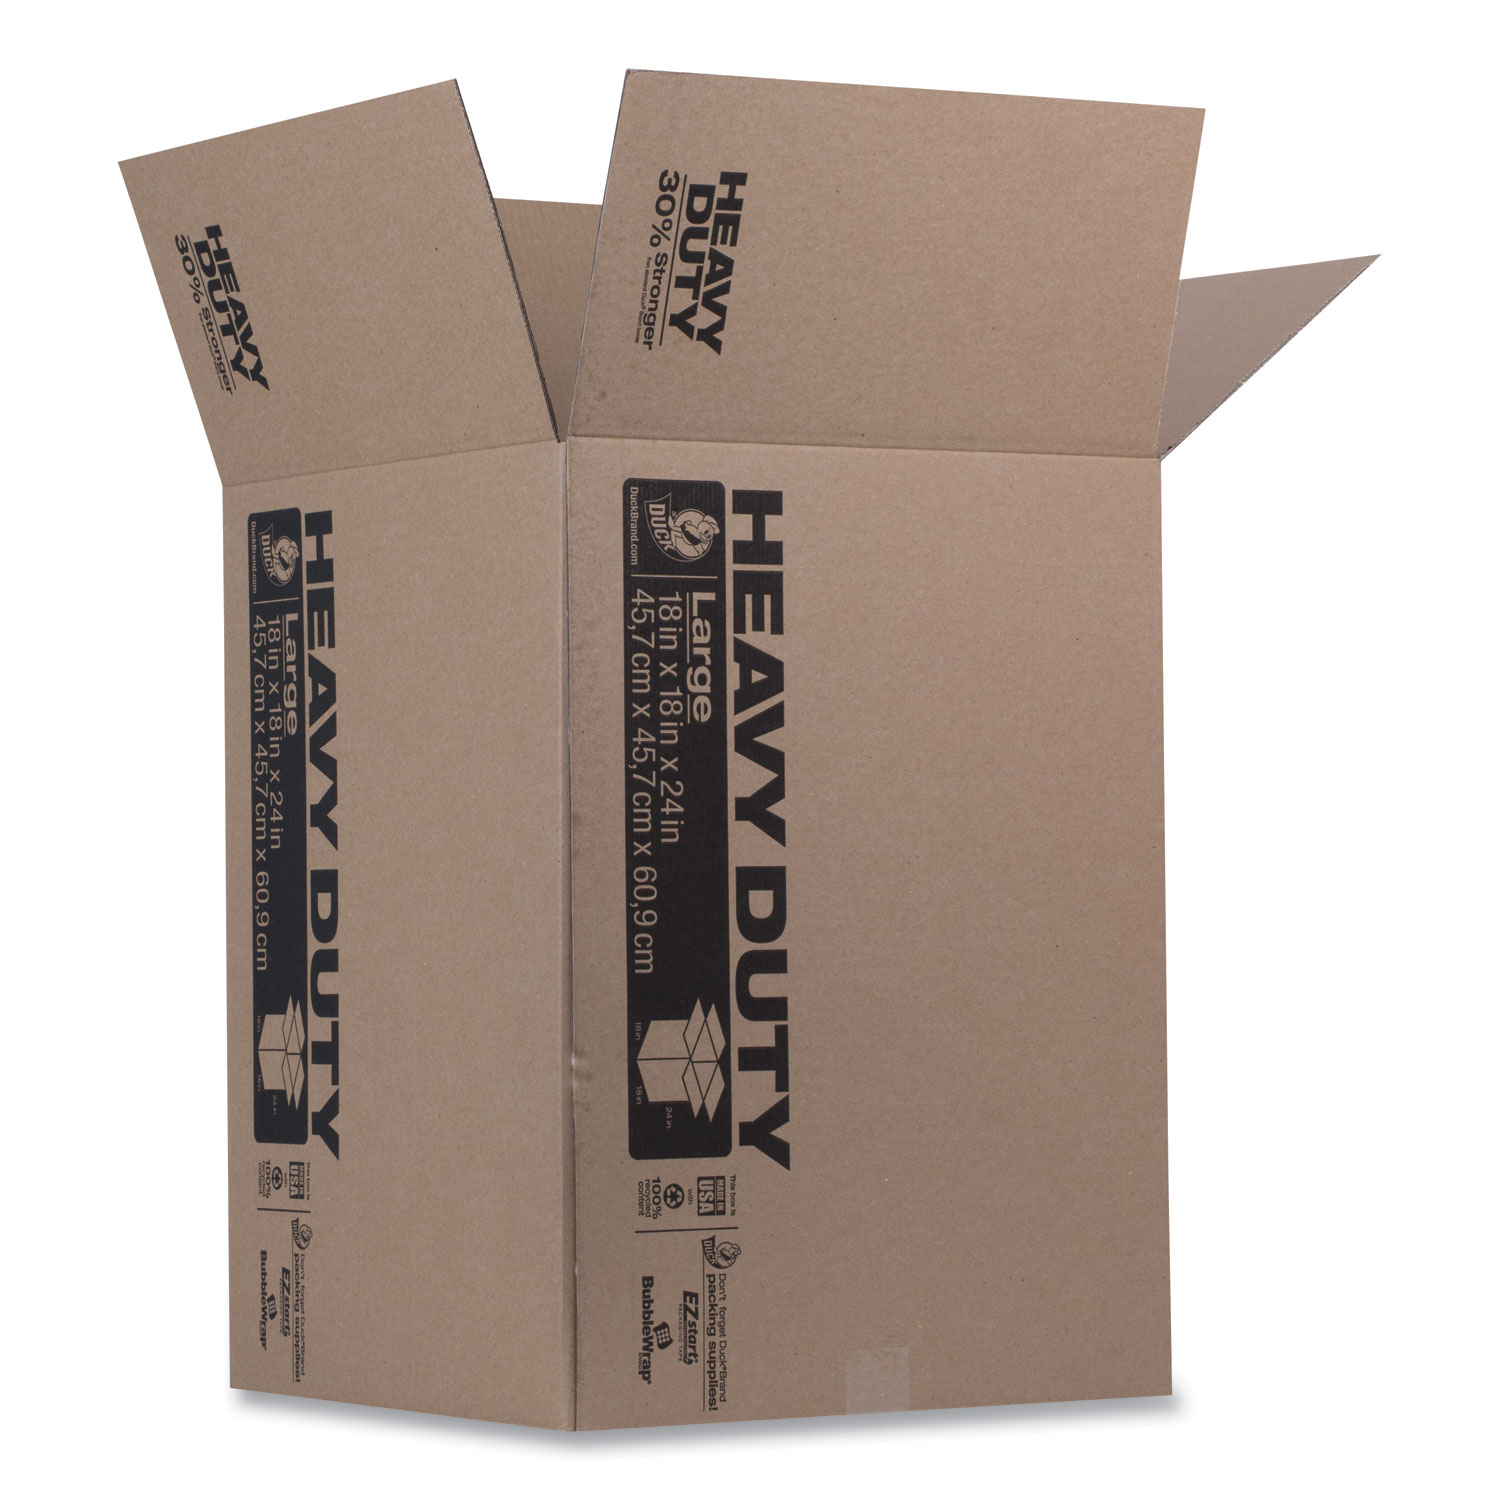 Duck Brand Packing Paper